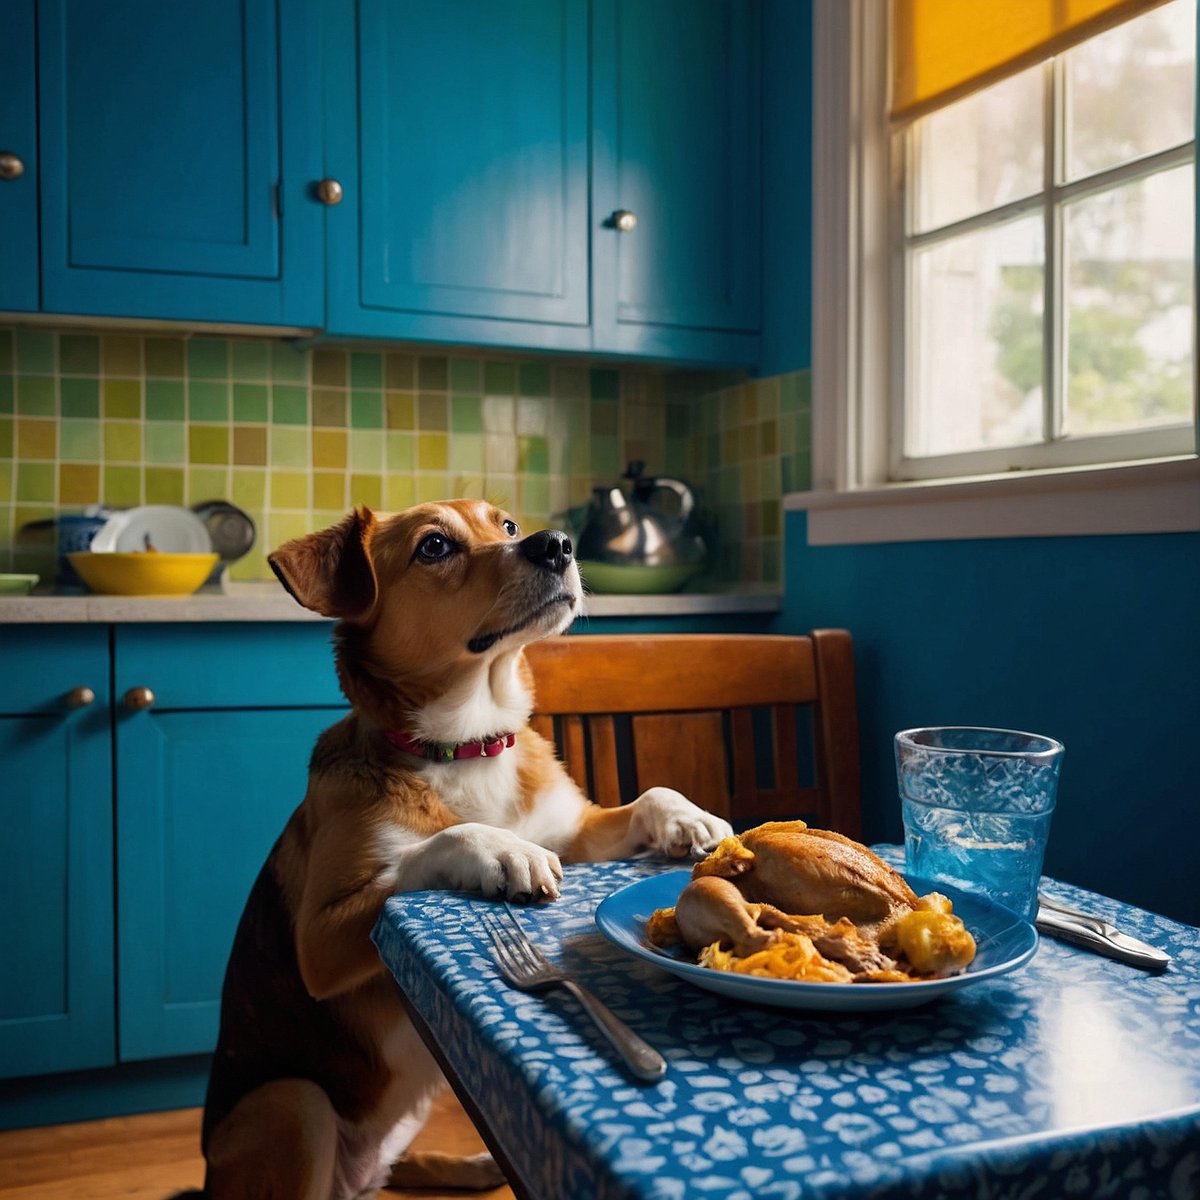 🚨 Breaking News for Dog Owners! 🚨 Is your pup eyeing that rotisserie chicken? Before you share, read our latest blog post to find out if it's safe! Spoiler: top-notch advice inside for your furry friend's dinner! 🍗🐶 #DogCare #PetHealth